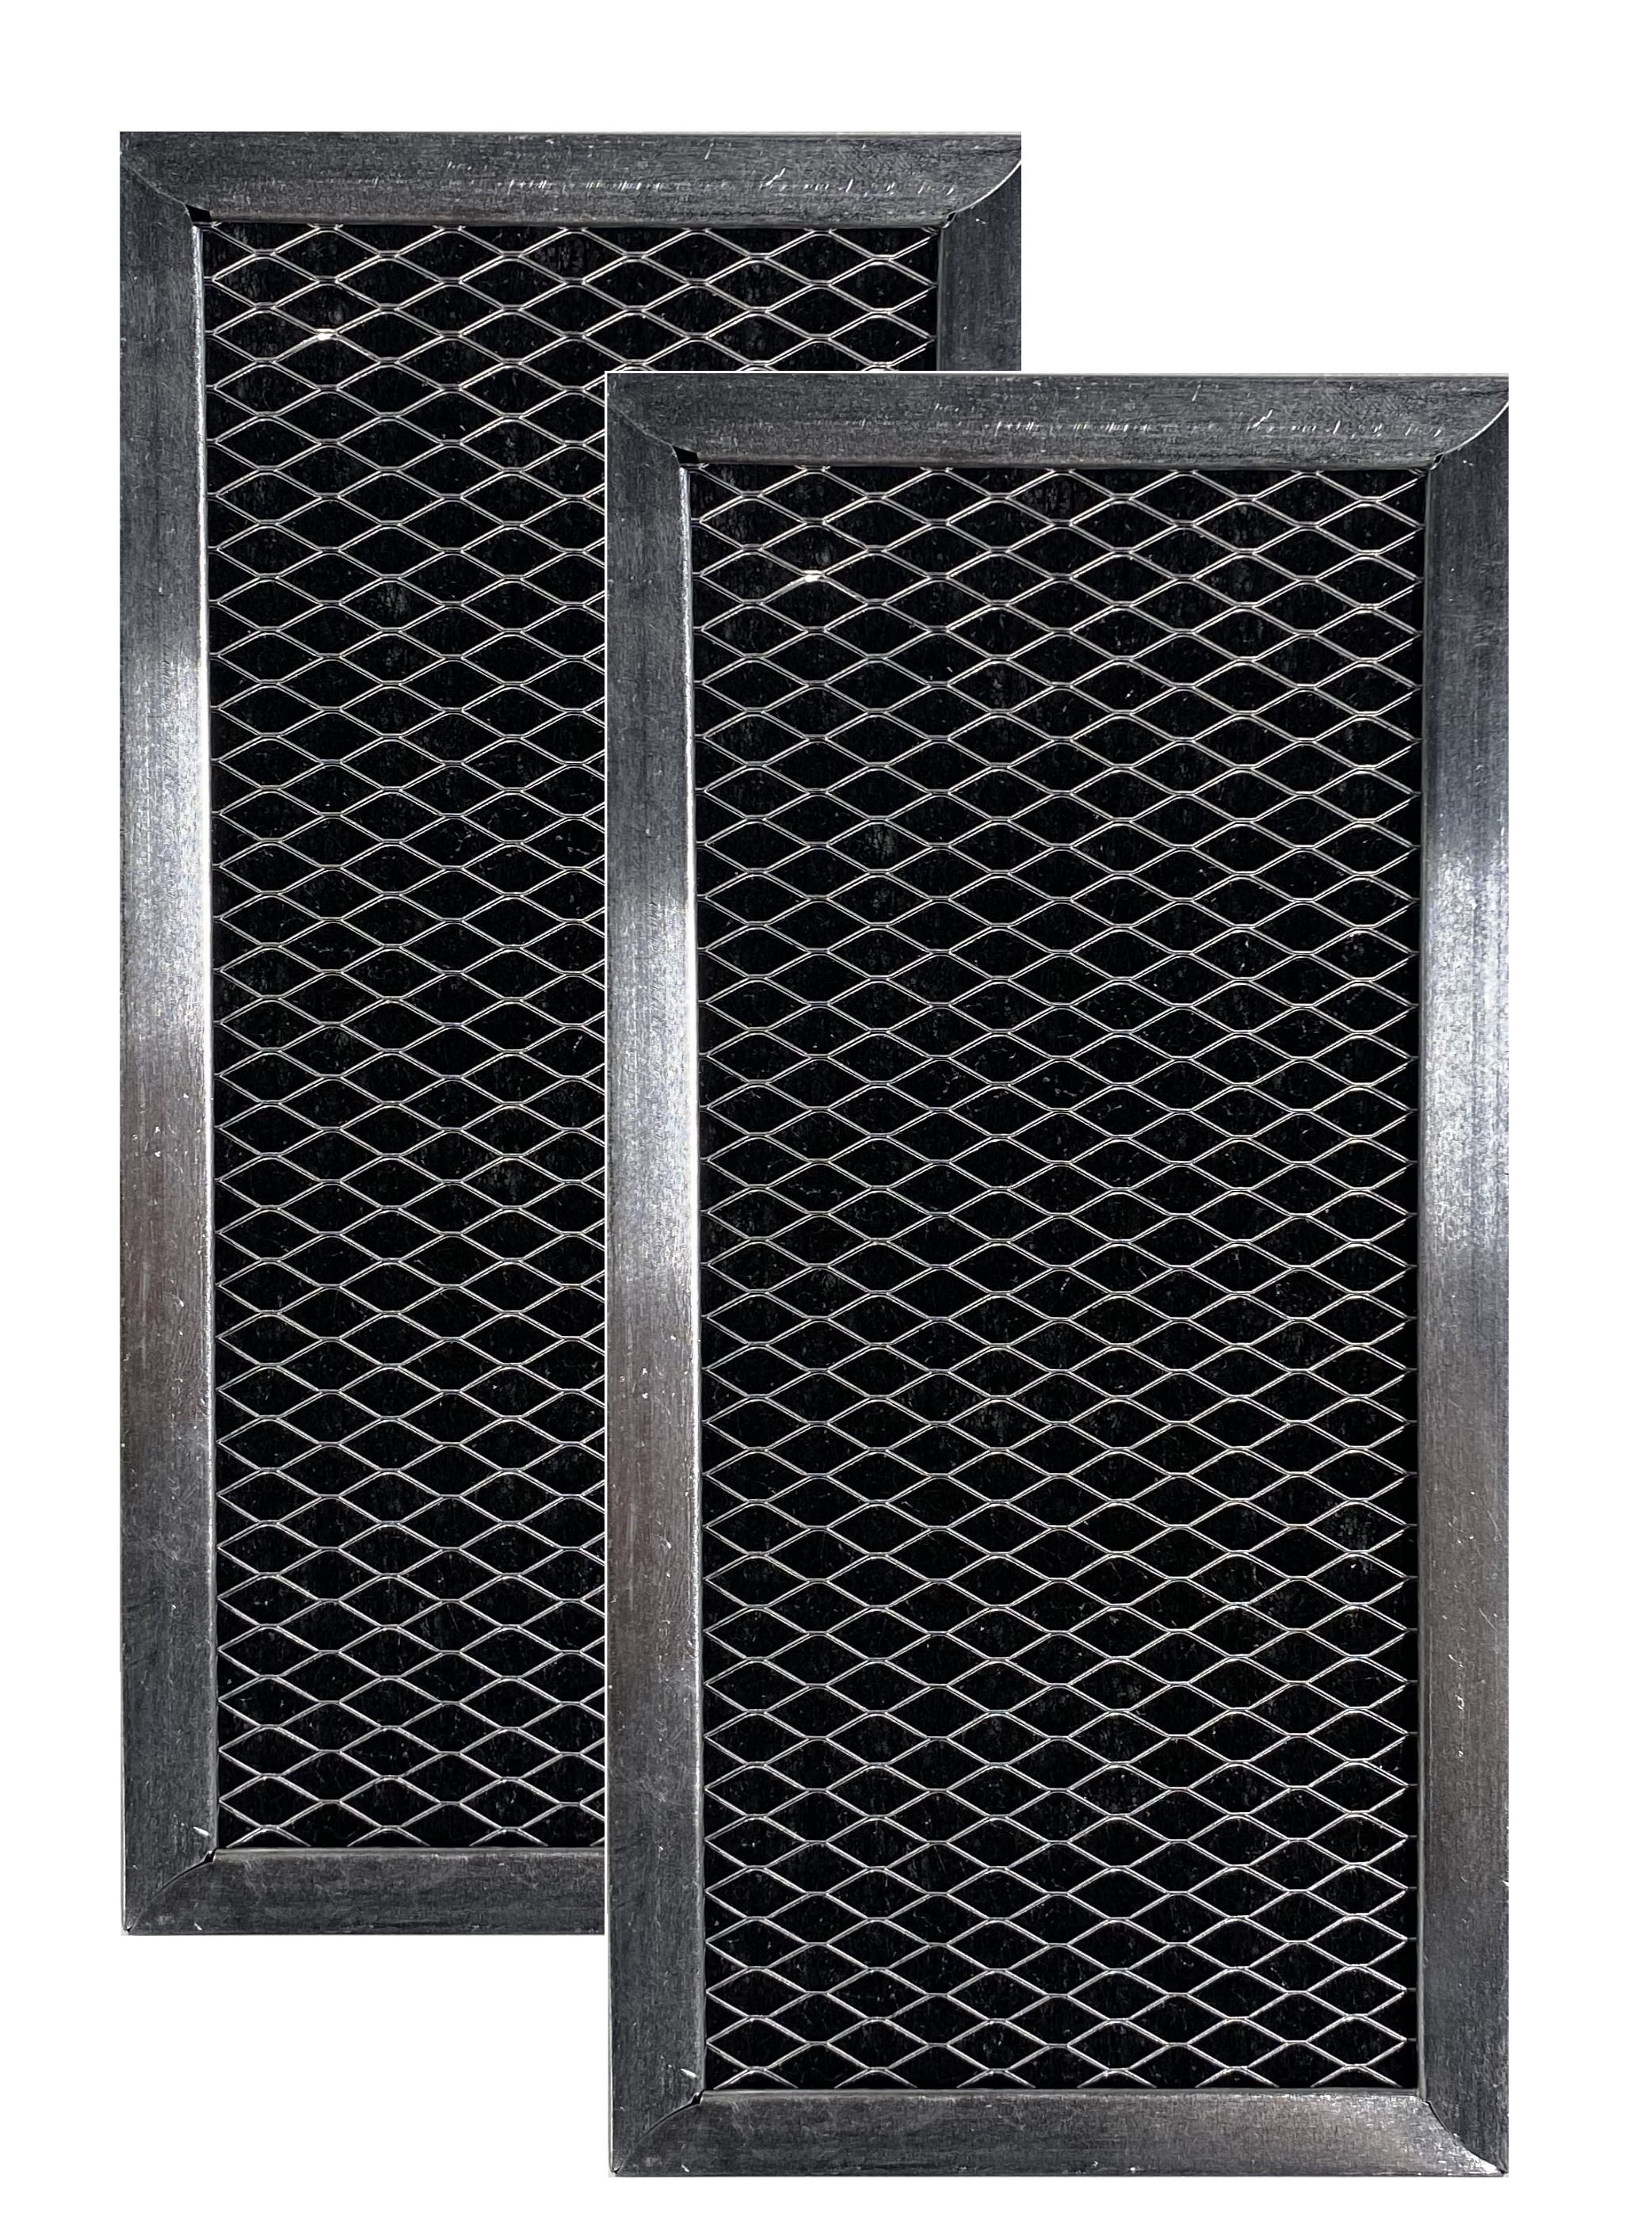 HOLMES HAP759-TU COMPATIBLE CARBON FILTER REPLACEMENT 6" x 9-1/4" x 1/4" 4-Pack 